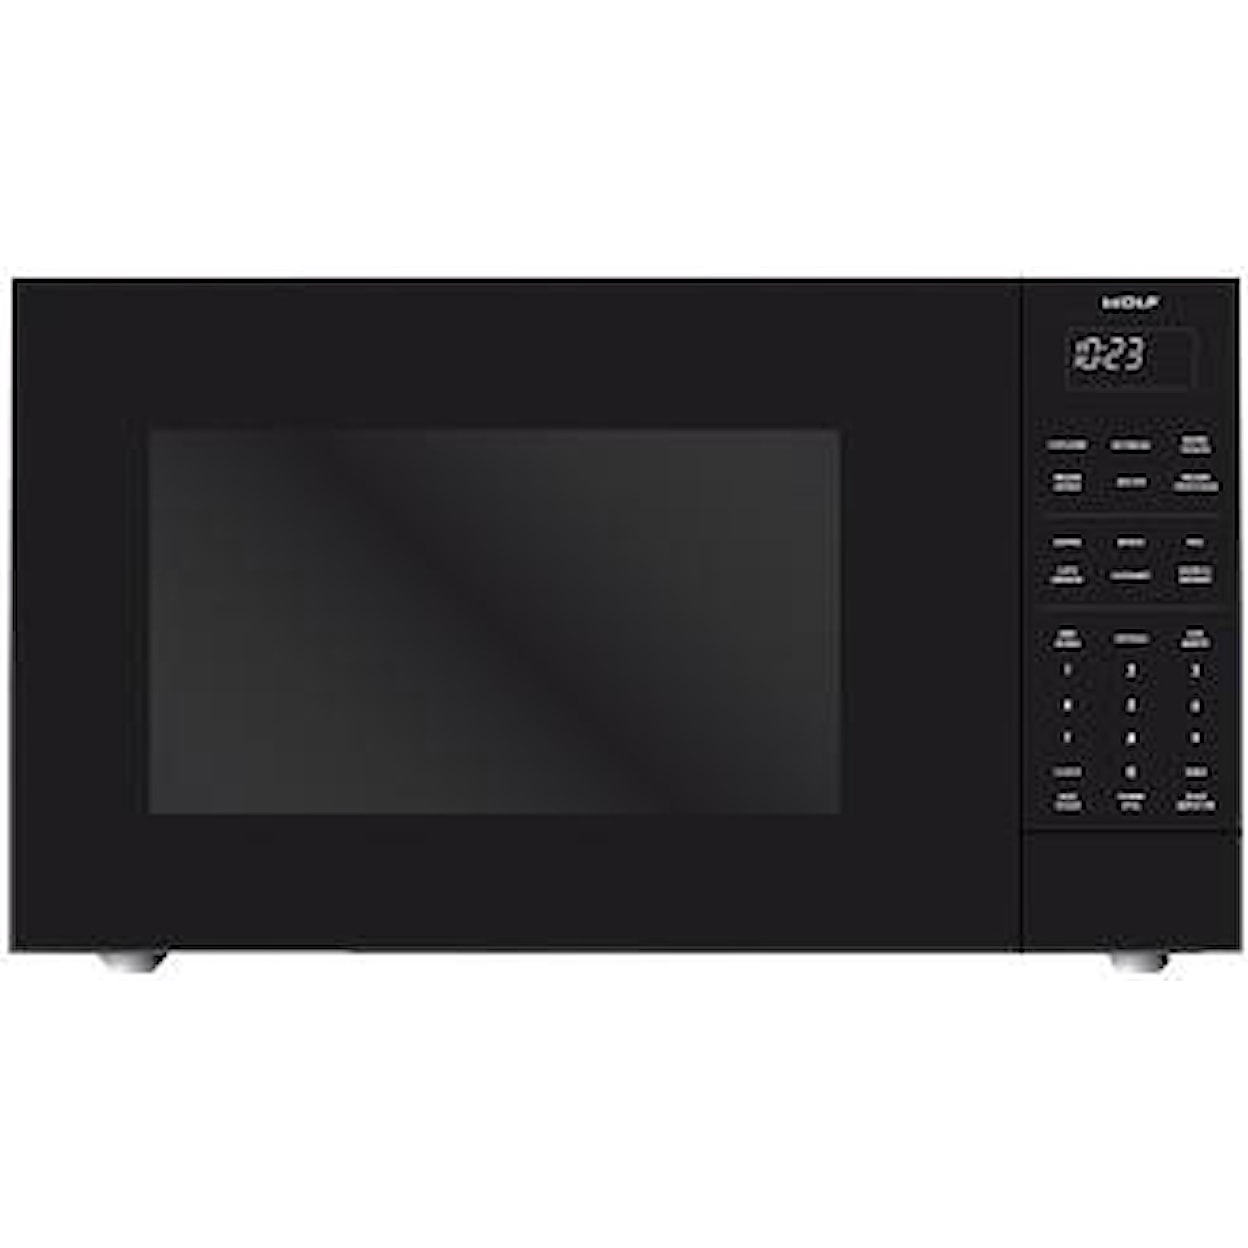 Wolf Microwaves 2.0 Cu. Ft. Standard Microwave Oven